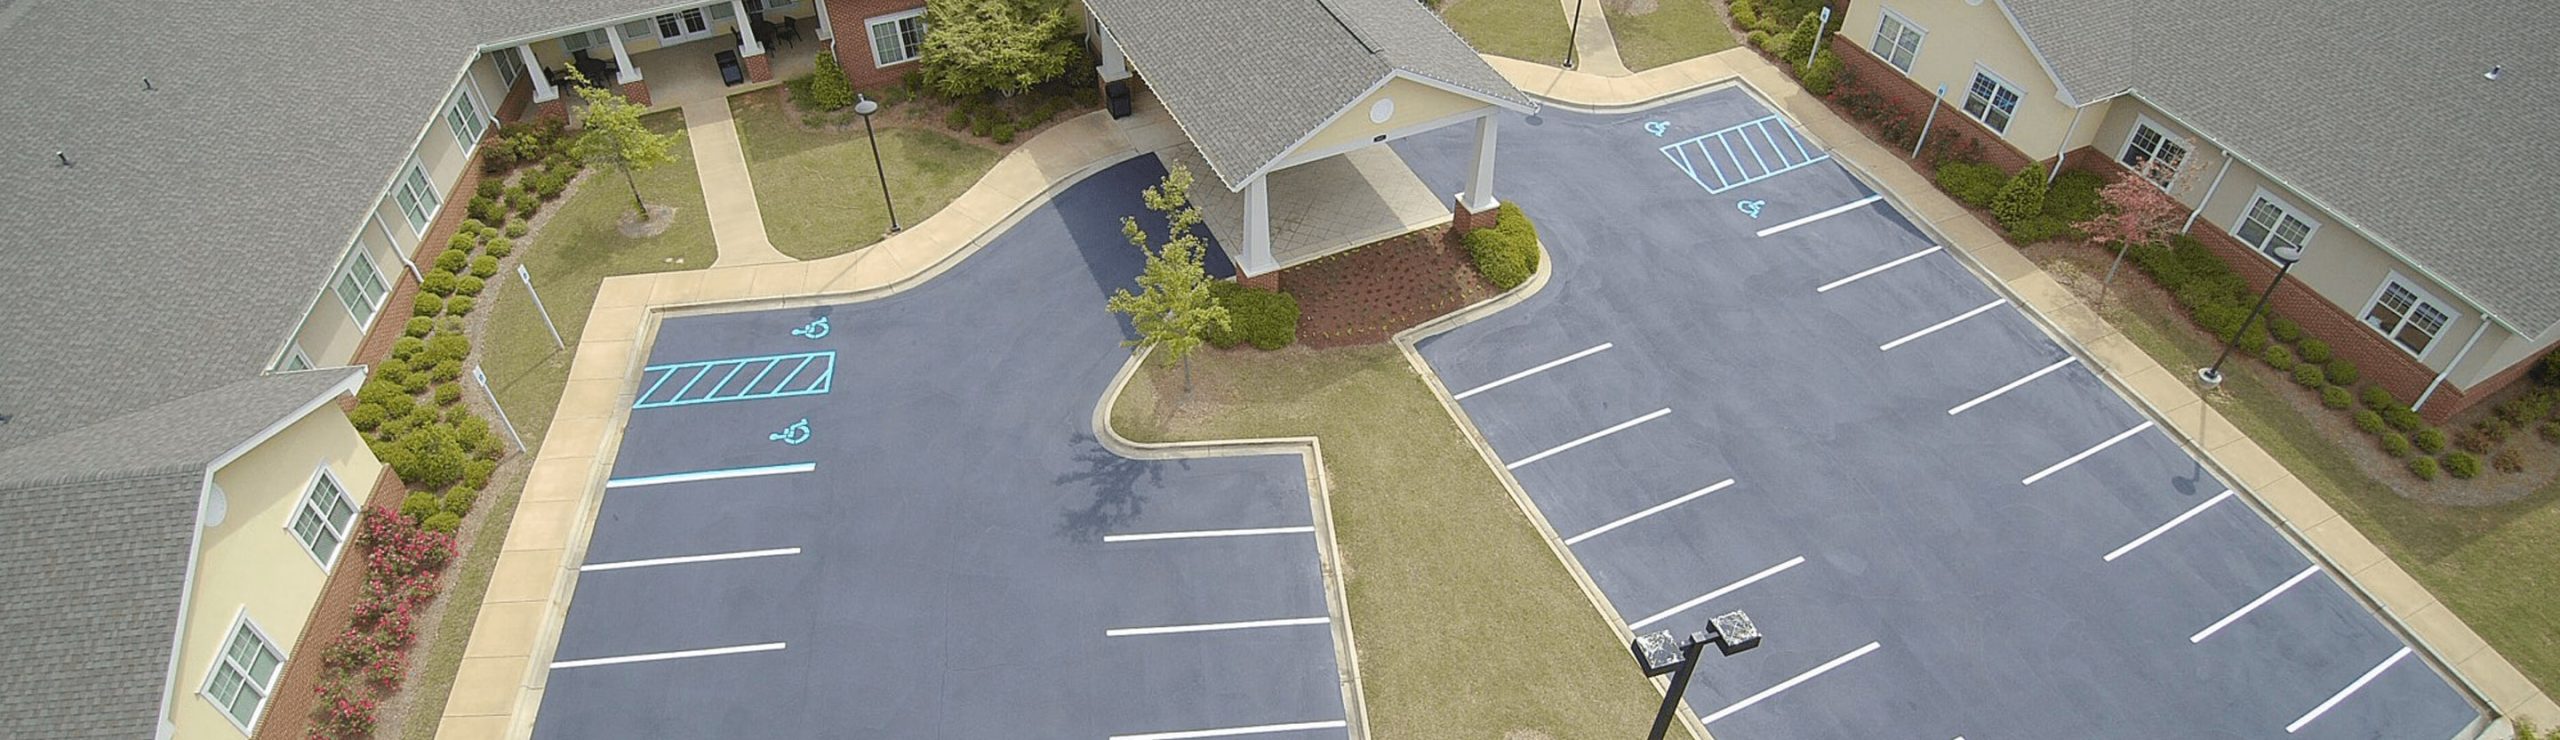 ADA Parking Striping: Ensuring Accessibility and Compliance image